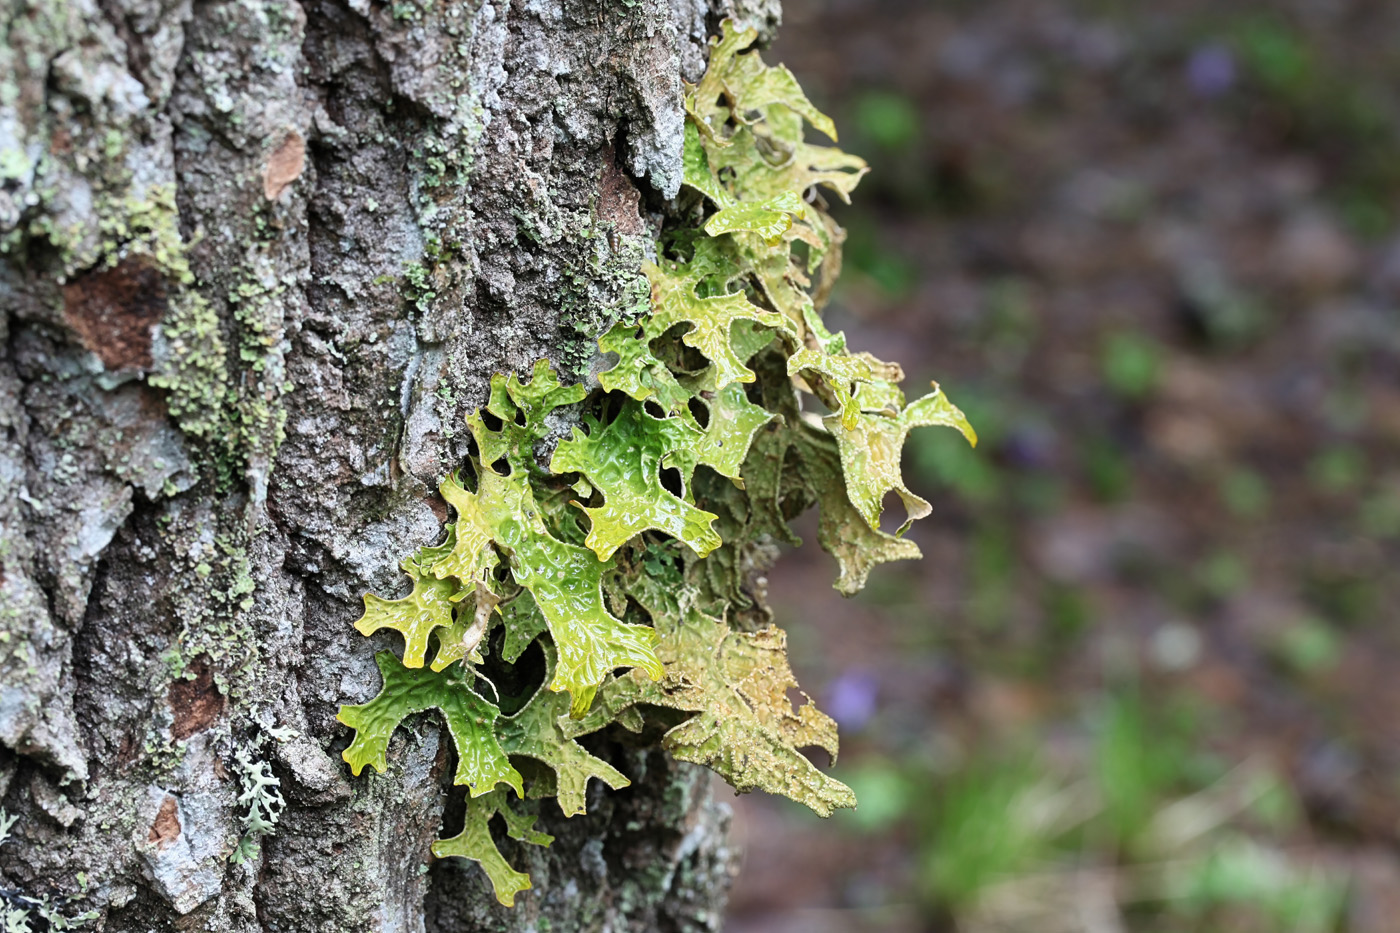 Has The Infamous Prion Met Its Match With Lungwort Lichen?